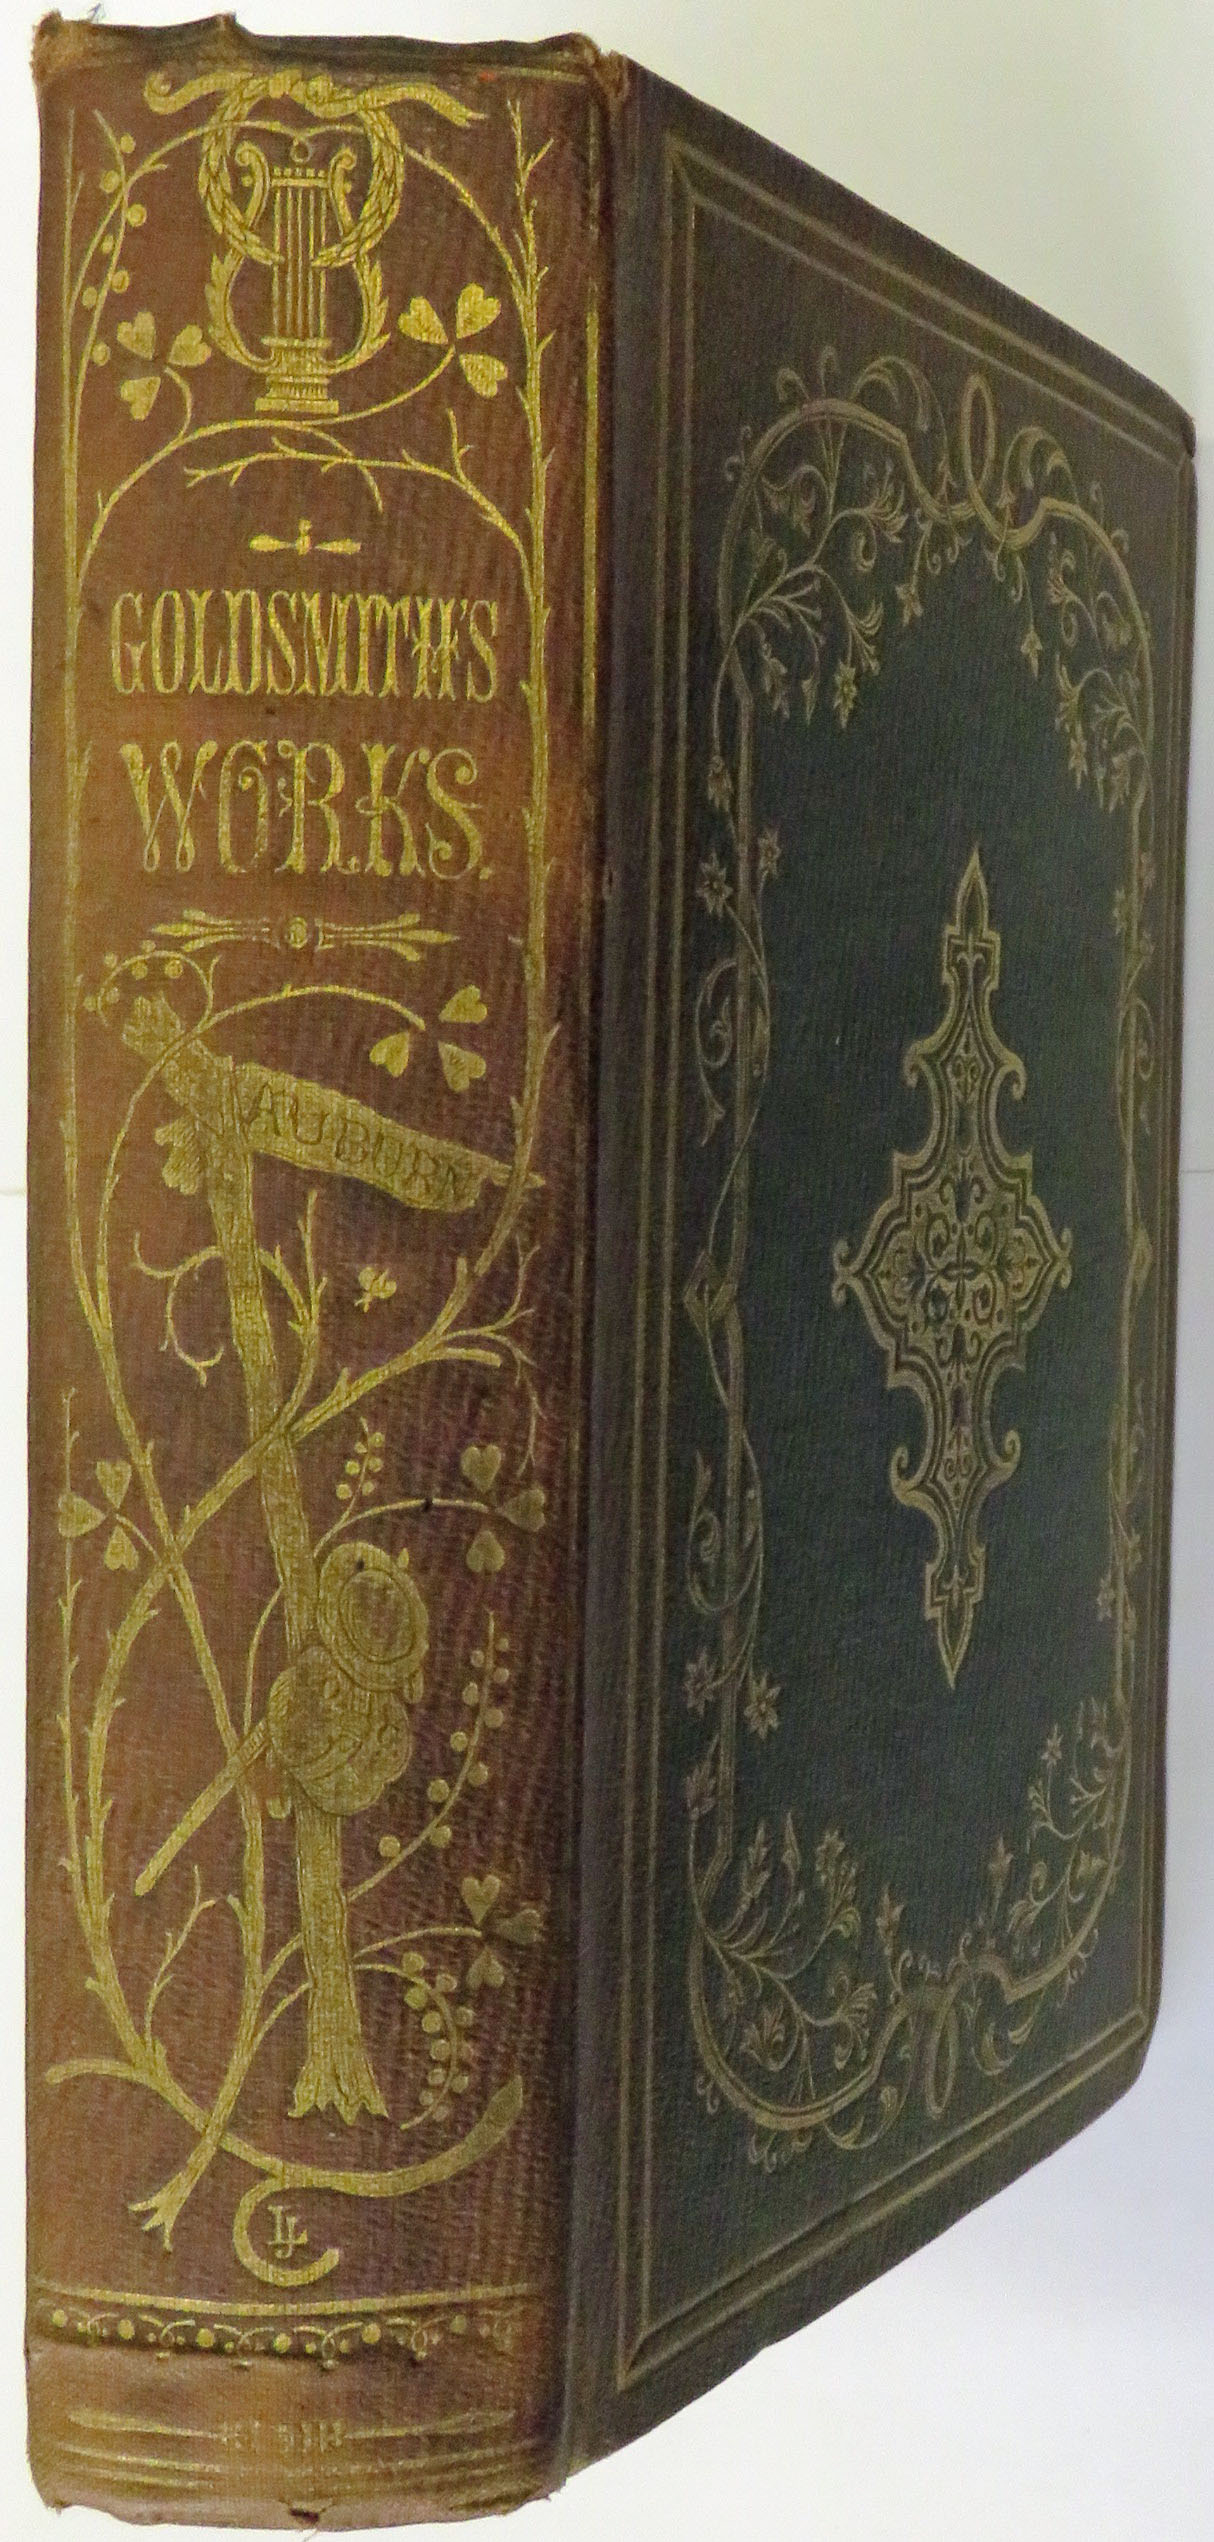 Oliver Goldsmith's Works: Poems. Comedies, Essays, Vicar of Wakefield: With Life By Washington Irving